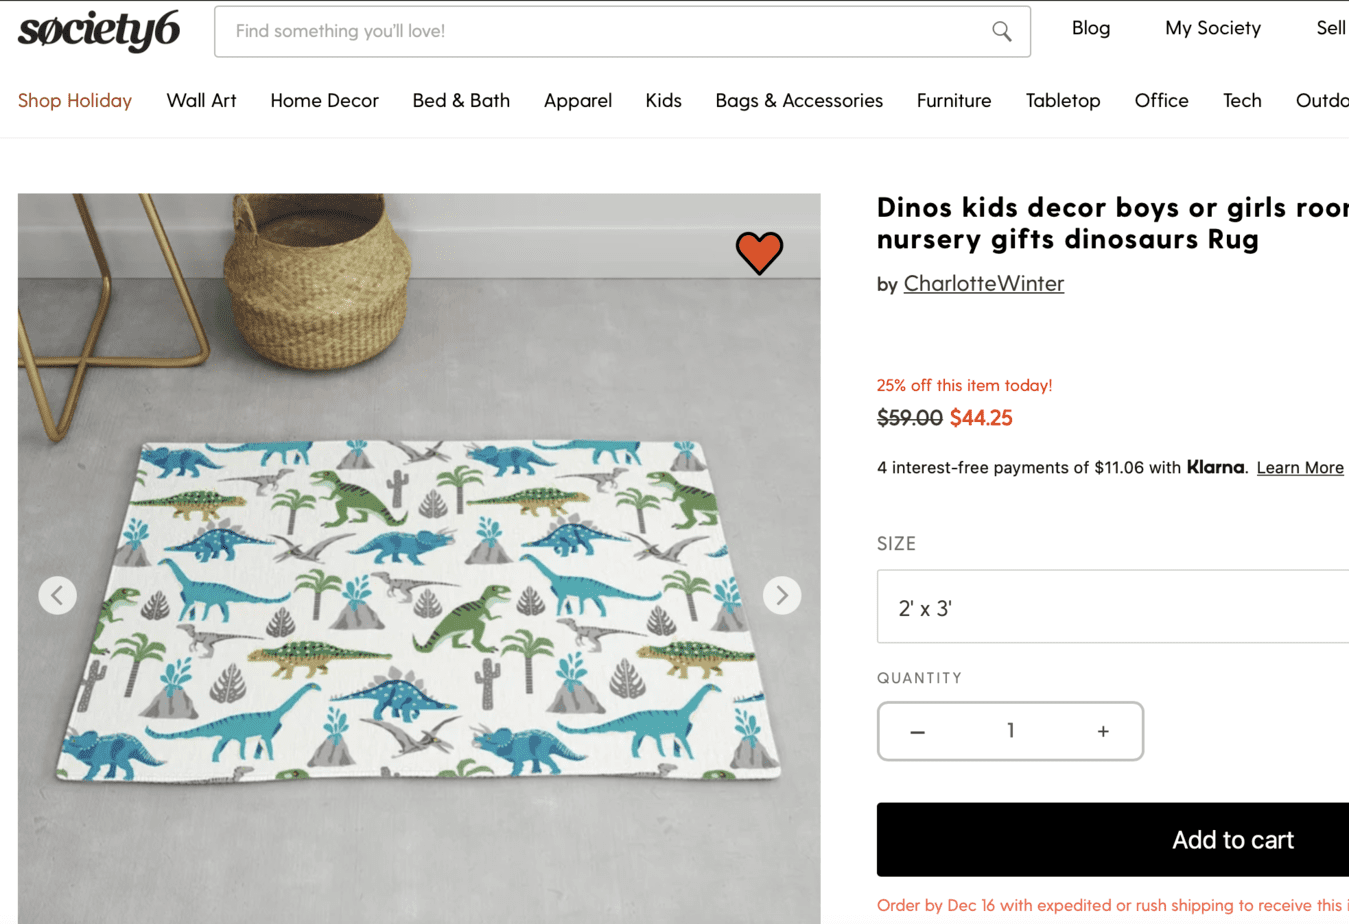 Dinos kids decor boys or girls room nursery gifts dinosaurs Rug from Society6. Dinosaur gifts for a 5 year old.